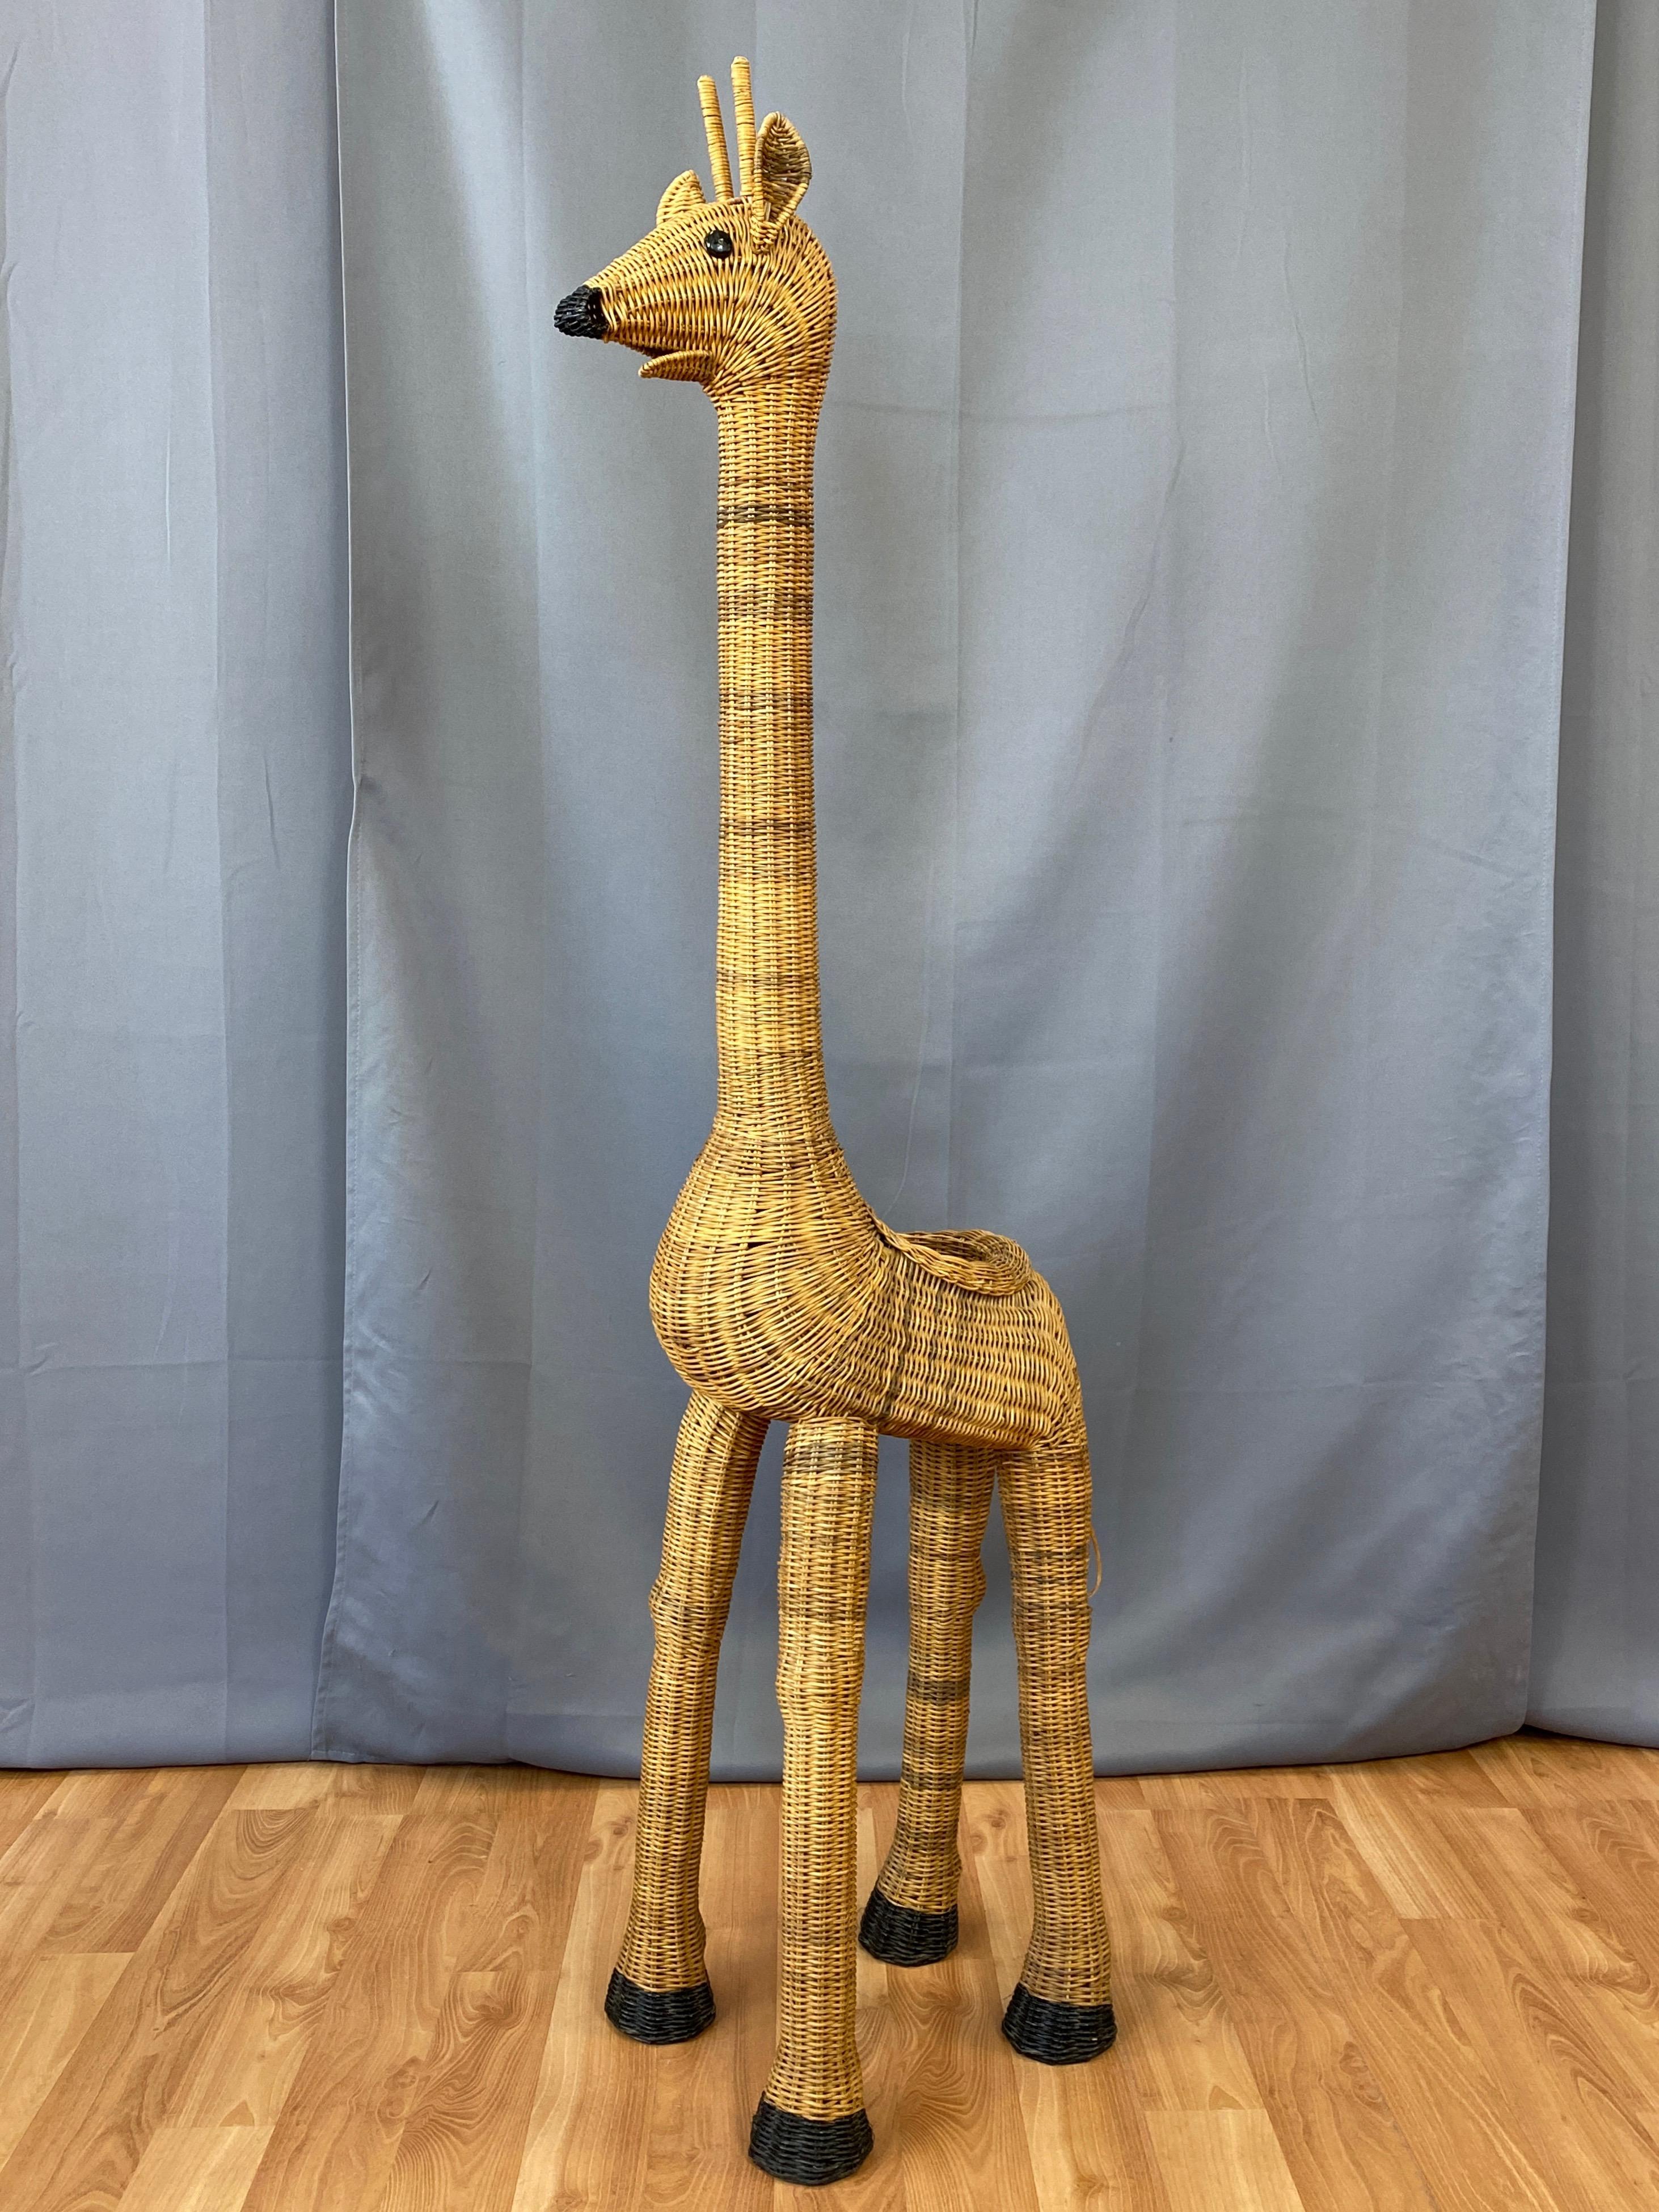 An utterly charming vintage five-foot-tall wicker giraffe plant stand, originally produced in the 1960s and into the 1970s.

Exceptionally well-crafted of handwoven and shaped natural wicker that displays attractive subtle tonal variations